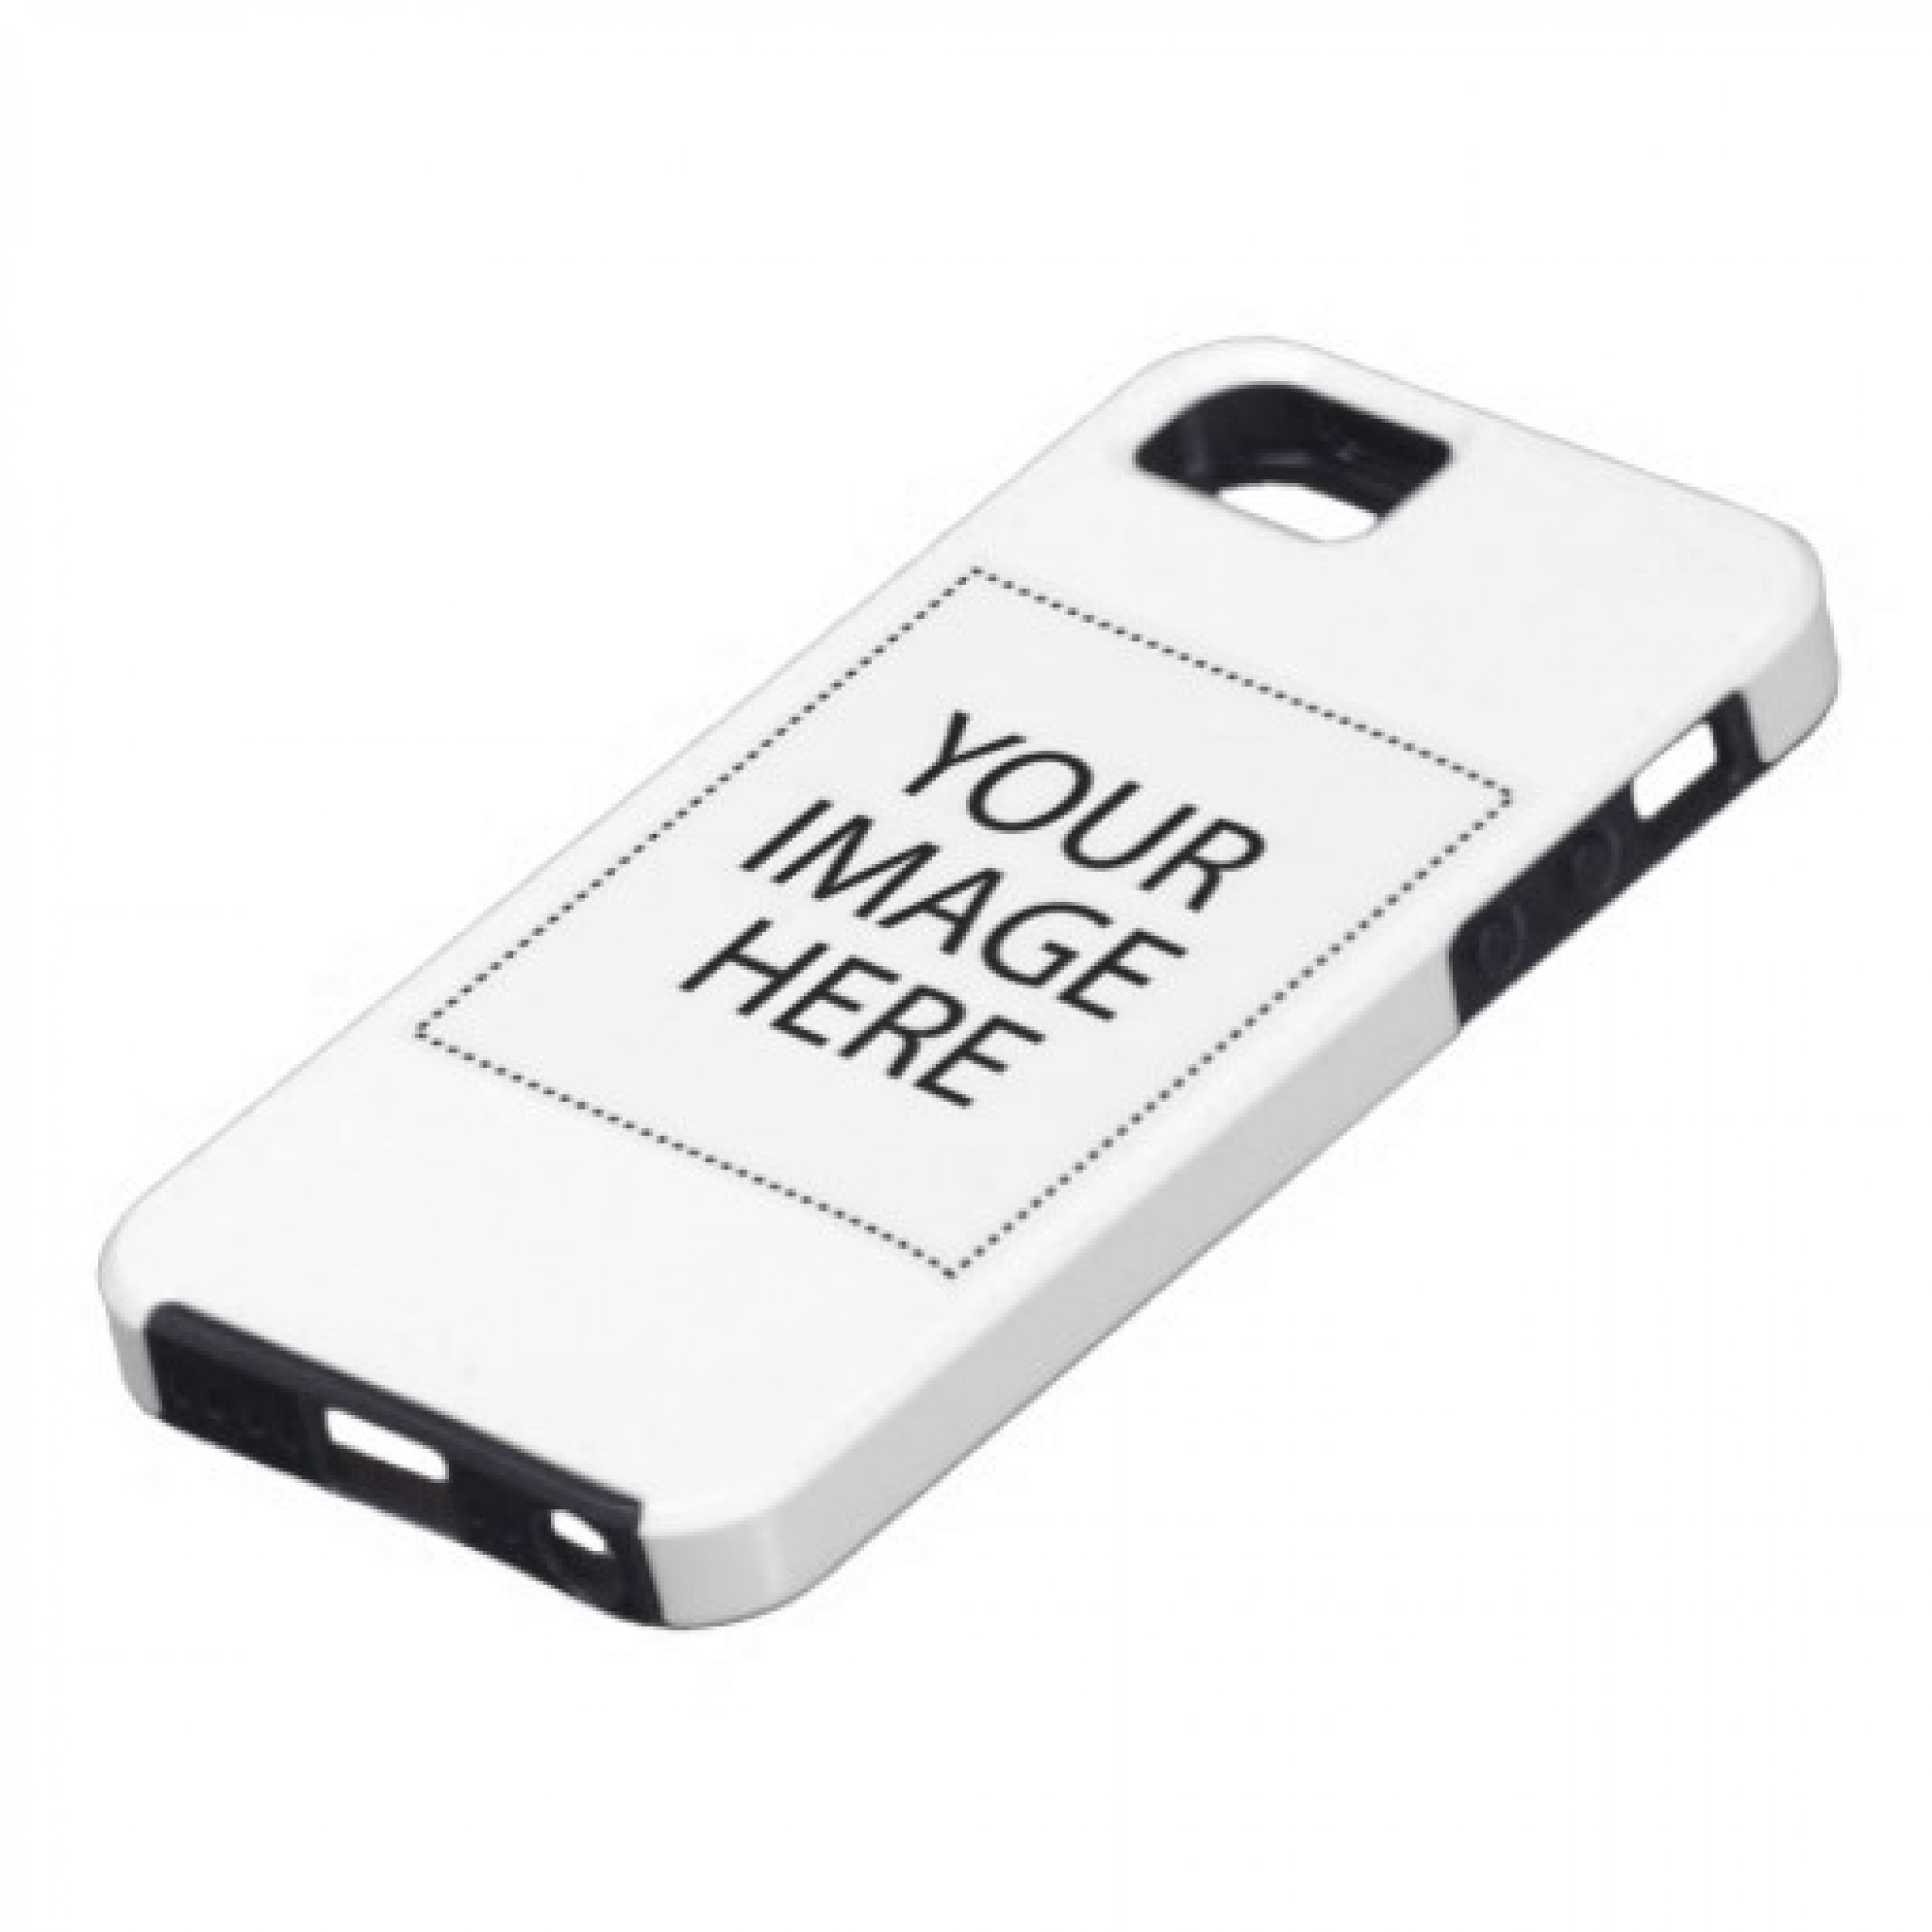 13. Custom Case for iPhone 5 - Available for 44.95 